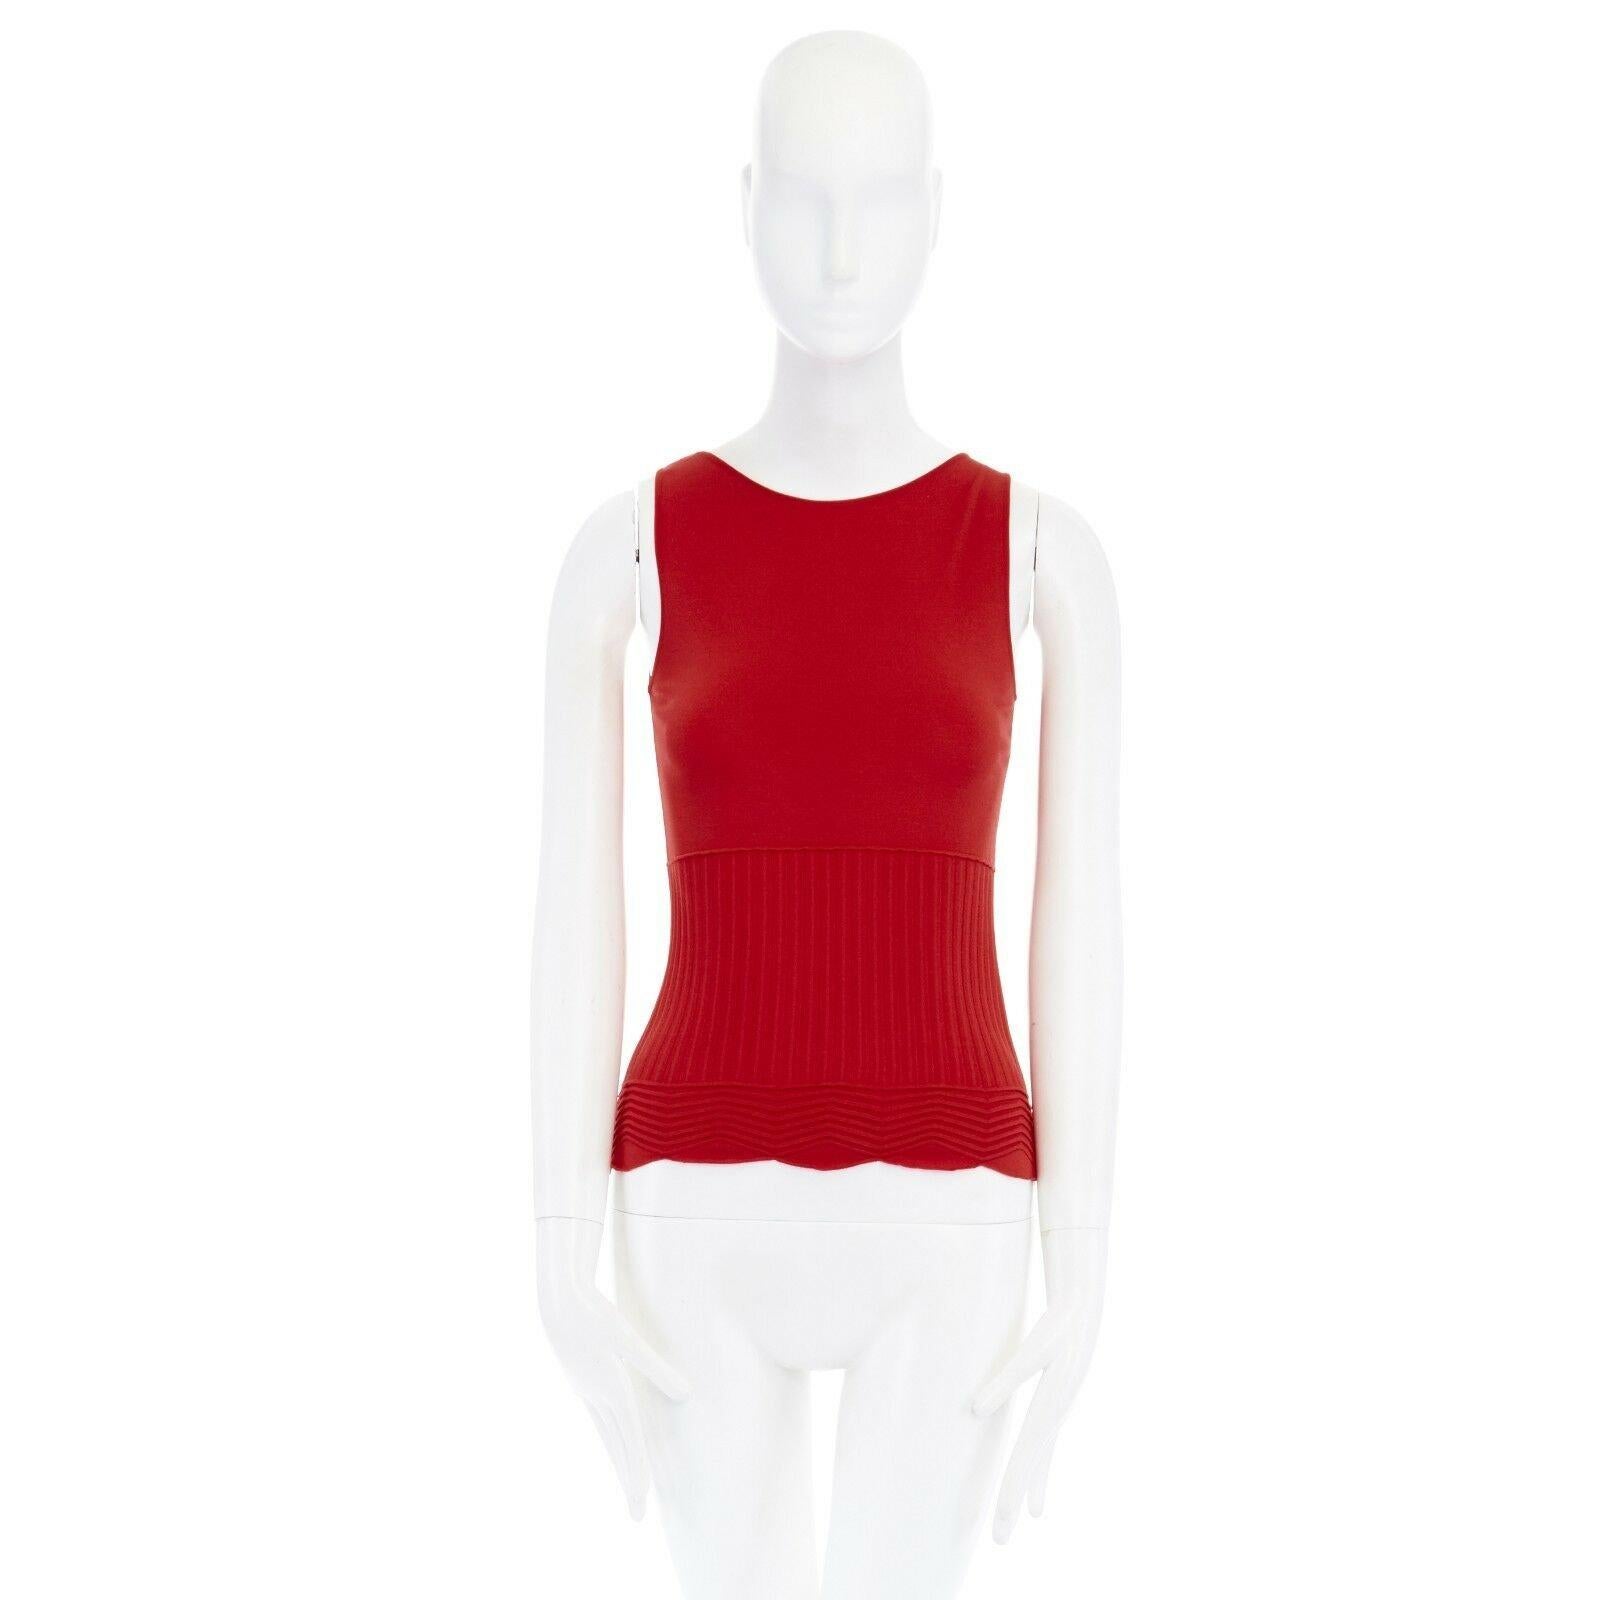 VALENTINO Vintage red viscose blend knitted ribbed hem sleeveless top XS
Brand: Valentino
Model Name / Style: Sleeveless vest
Material: Viscose blend
Color: Red
Pattern: Solid
Closure: Pull on
Extra Detail: Ribbed hem. Scalloped hem. Sleeveless.